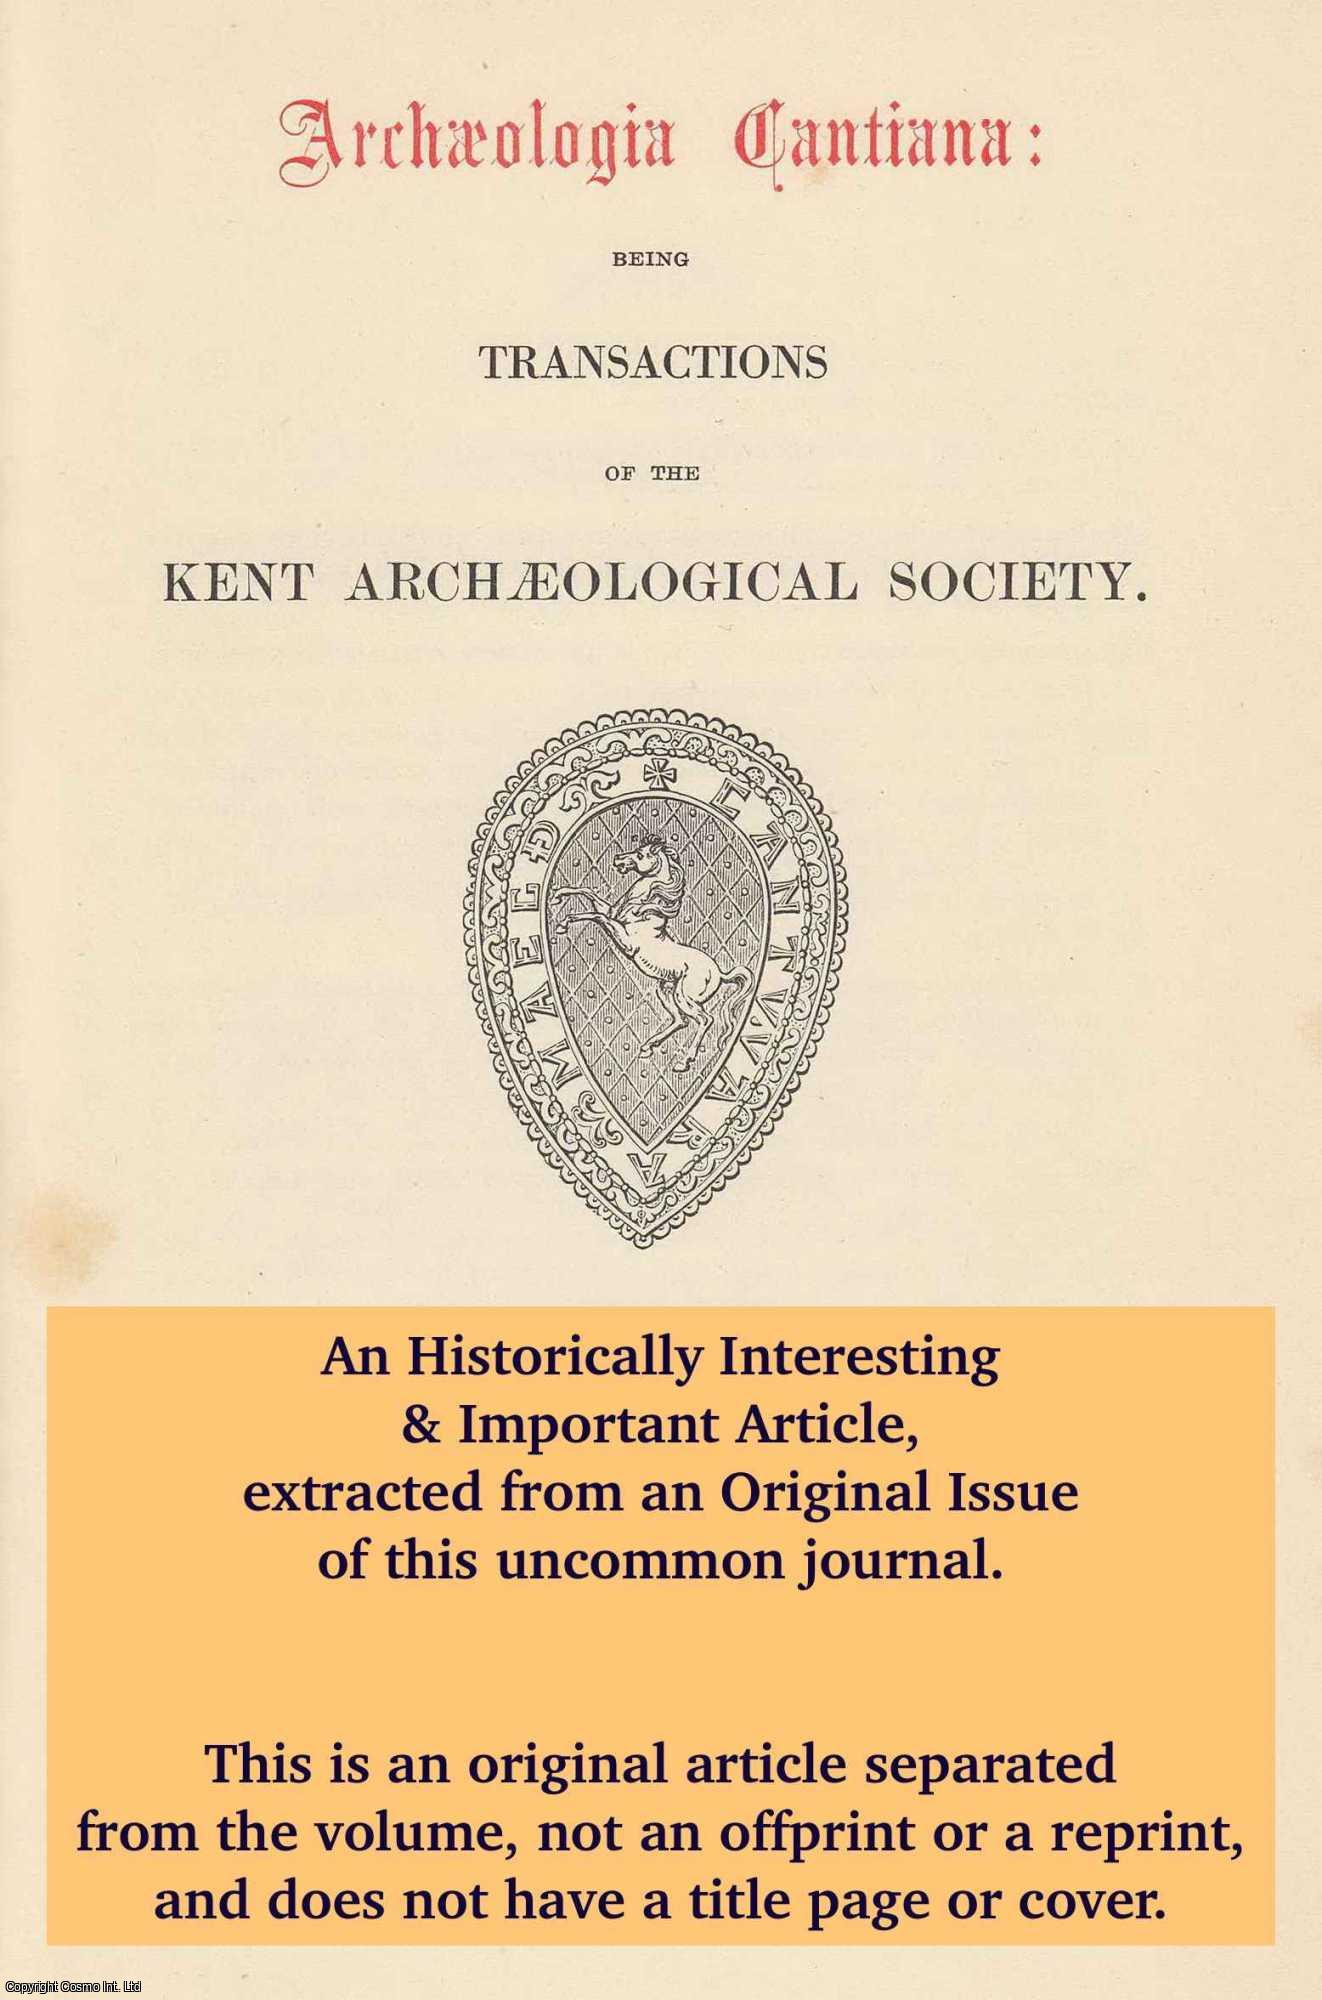 --- - Researches and Discoveries in Kent. A Pre-Conquest Sculptural Fragment from Rochester Cathedral. An original article from The Archaeologia Cantiana, 1973.